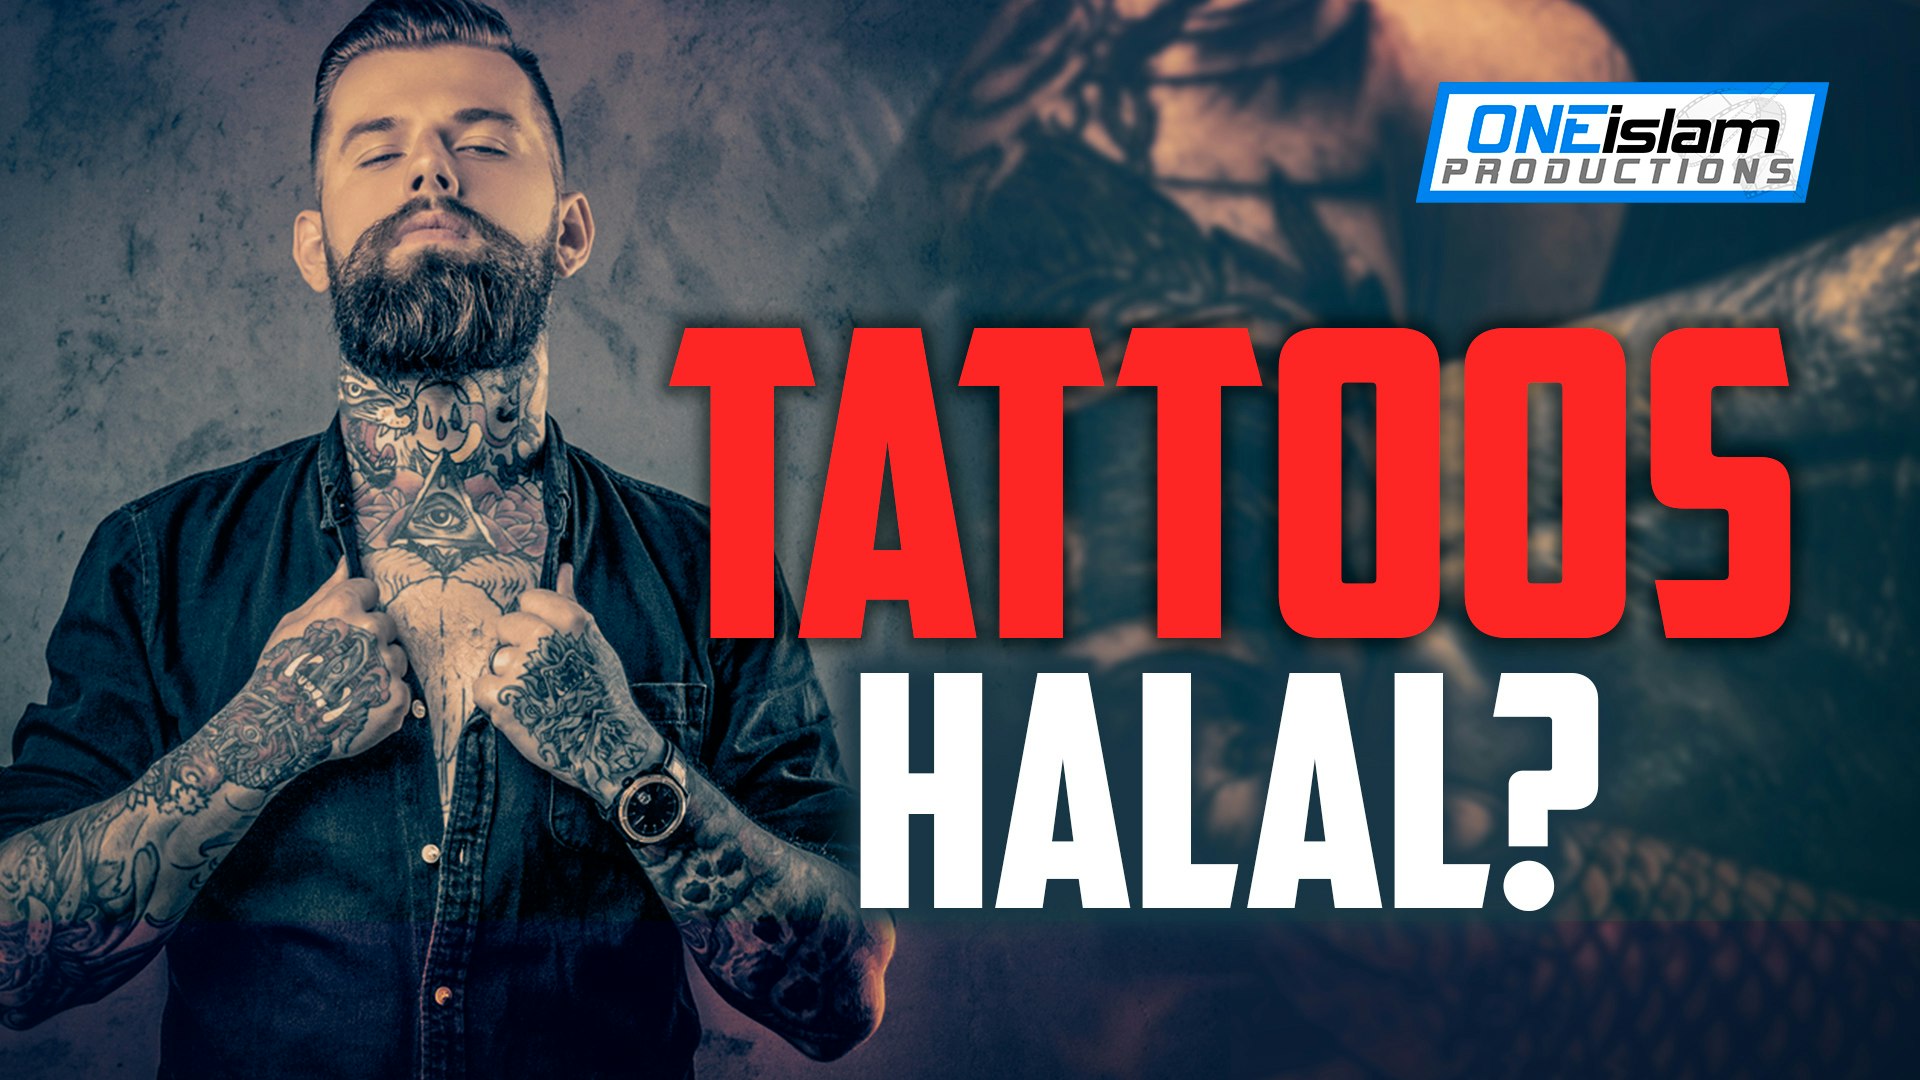 Tattoos Are Halal? - REACTION - YouTube